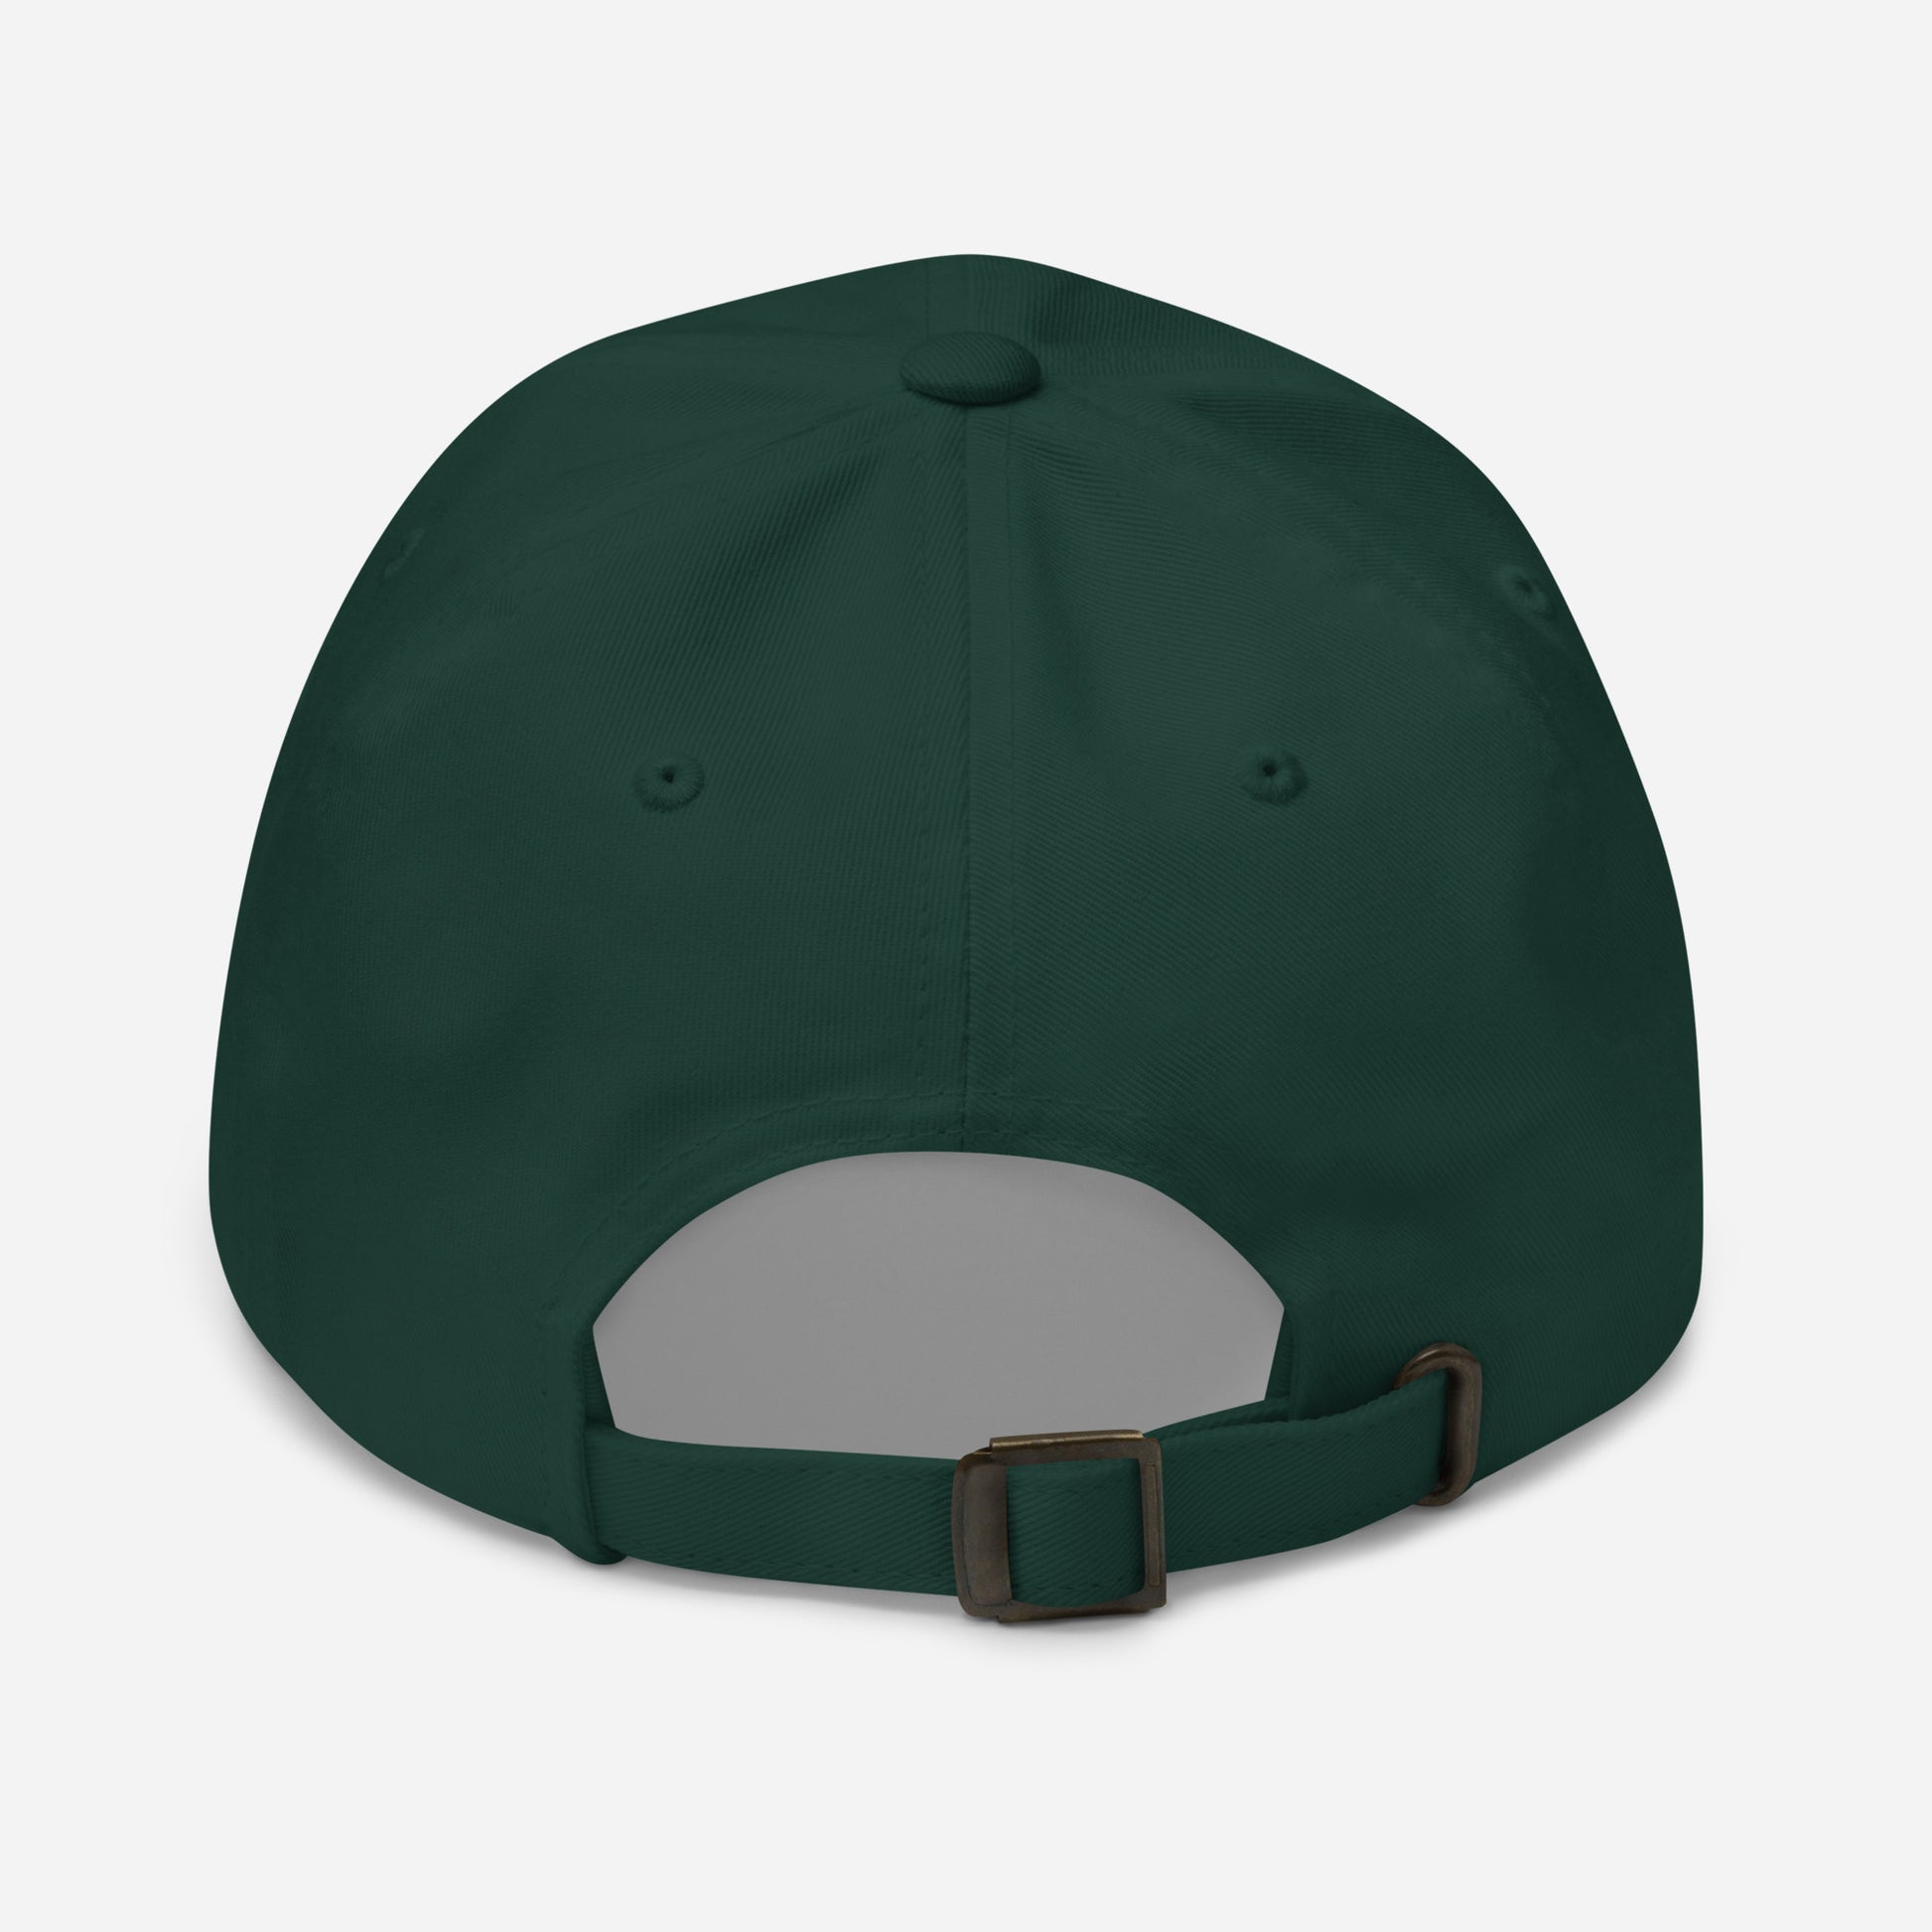 GreenJamaican flag dad hat, back side - ideal for sunny days